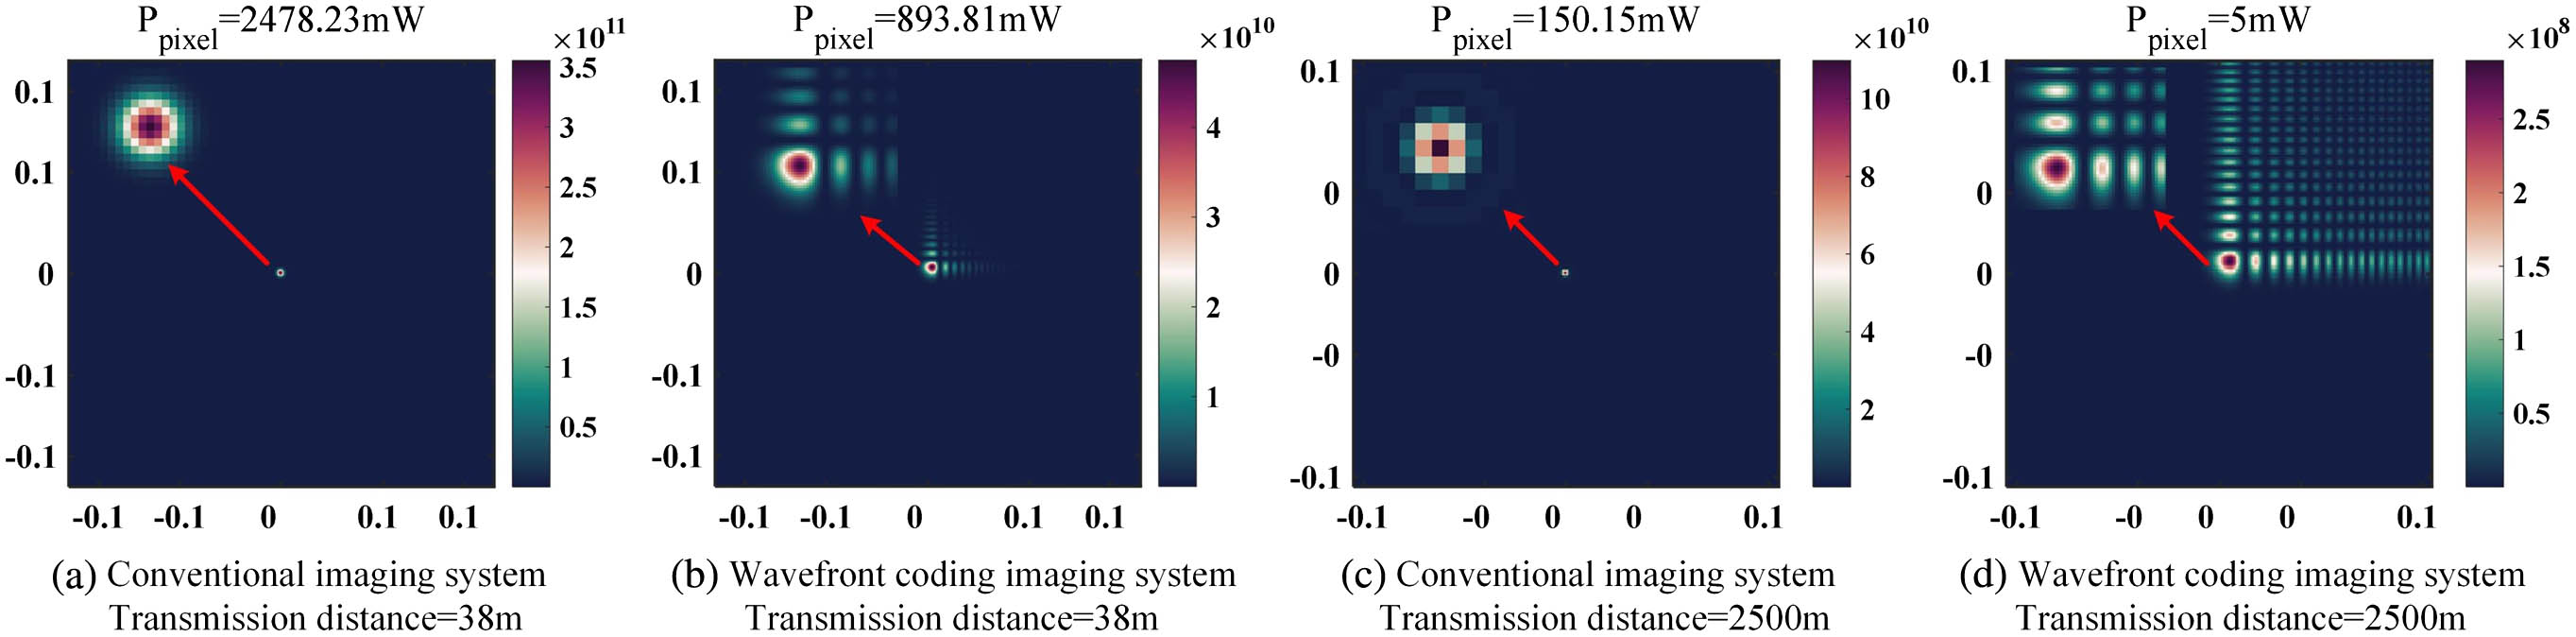 Spot profile and corresponding maximum single-pixel receiving power without defocus at the imaging plane of (a) conventional imaging system at the transmission distance of 38 m; (b) CPP wavefront coding imaging system at the transmission distance of 38 m; (c) conventional imaging system at the transmission distance of 2500 m; and (d) CPP wavefront coding imaging system at the transmission distance of 2500 m.